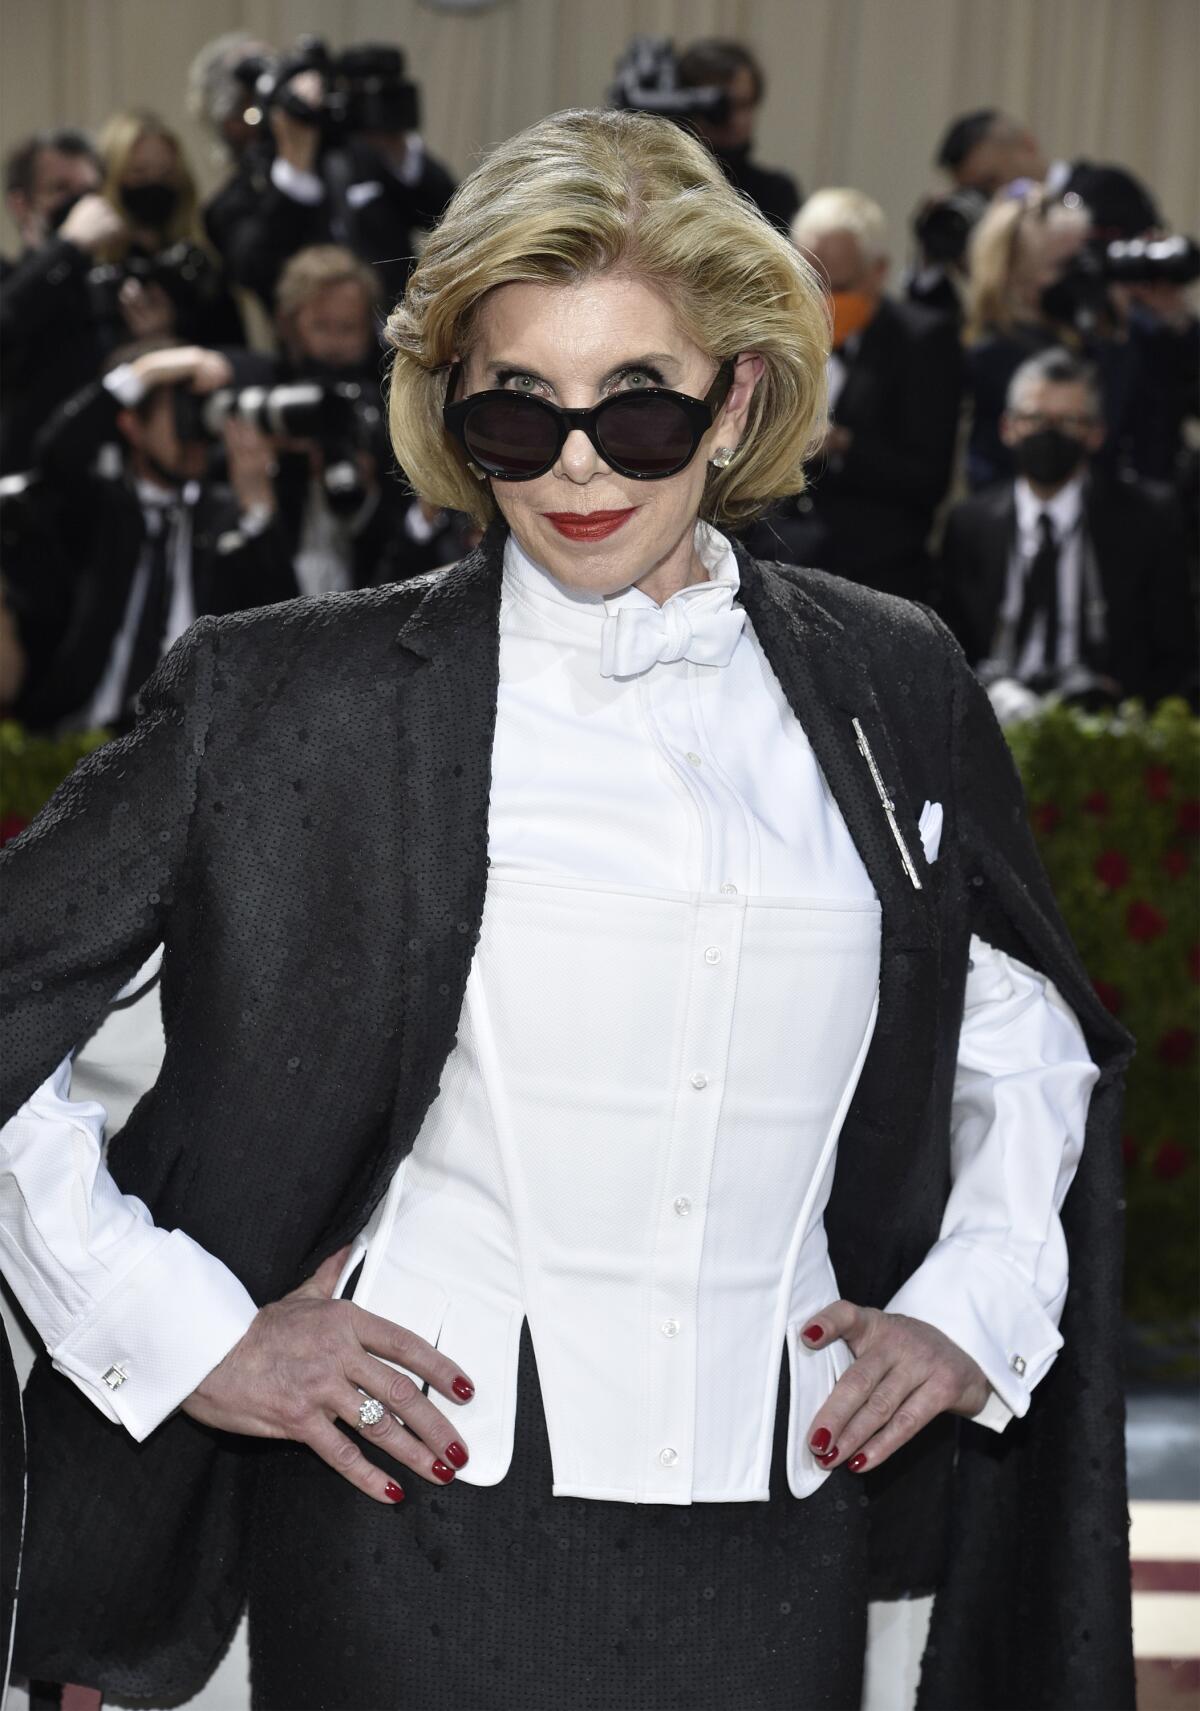 A blond woman wears sunglasses and a tuxedo at the Met Gala